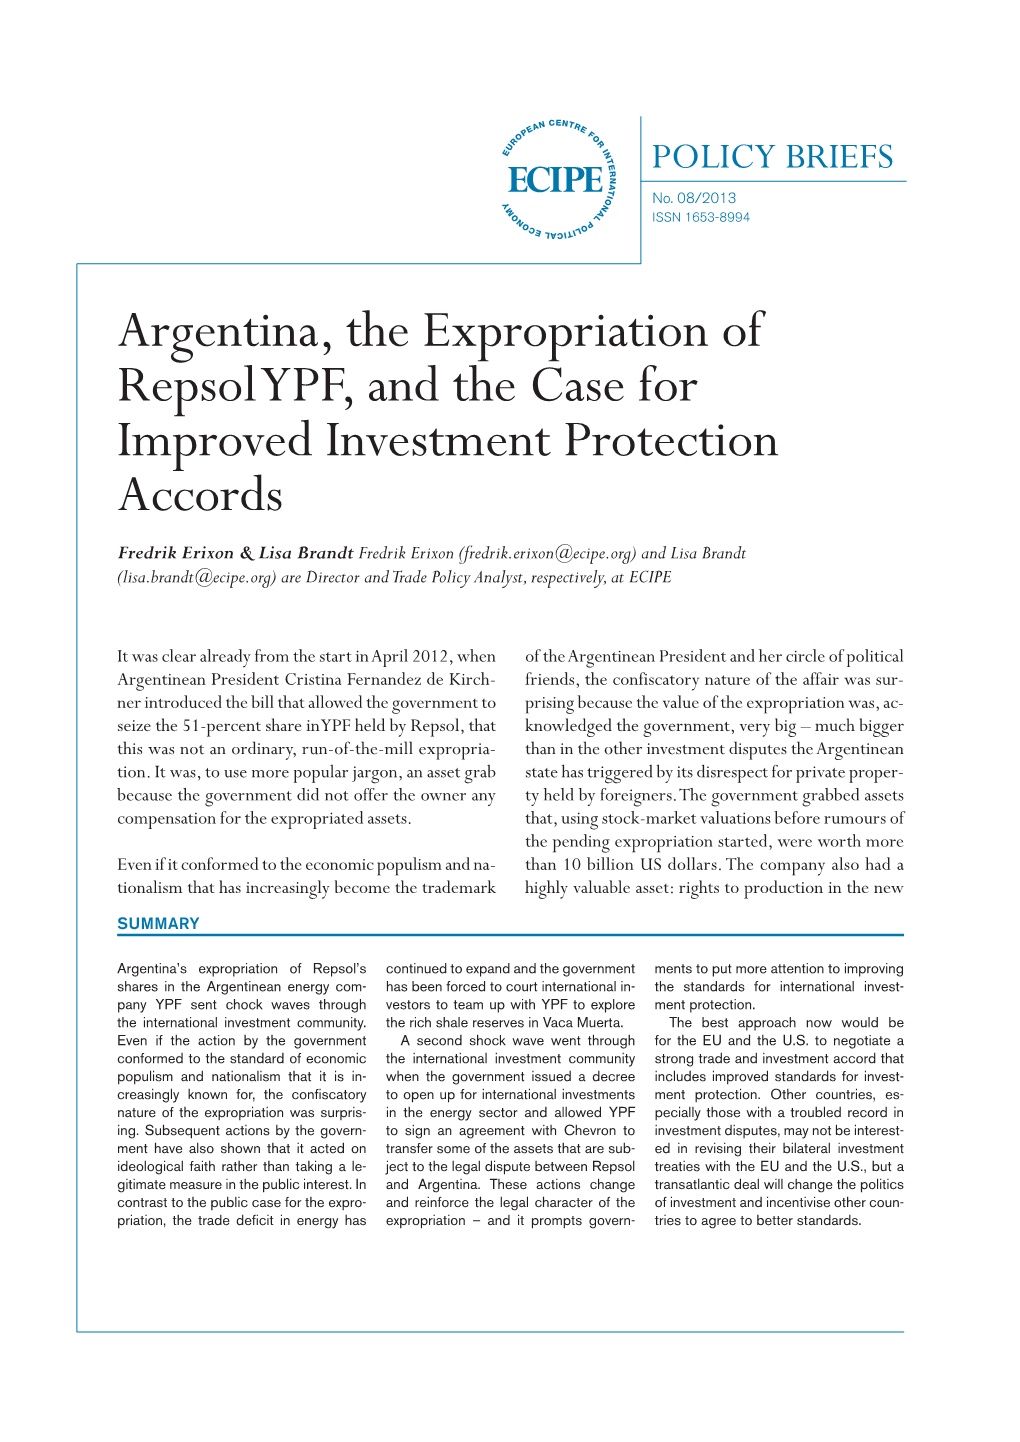 Argentina, the Expropriation of Repsol YPF, and the Case for Improved